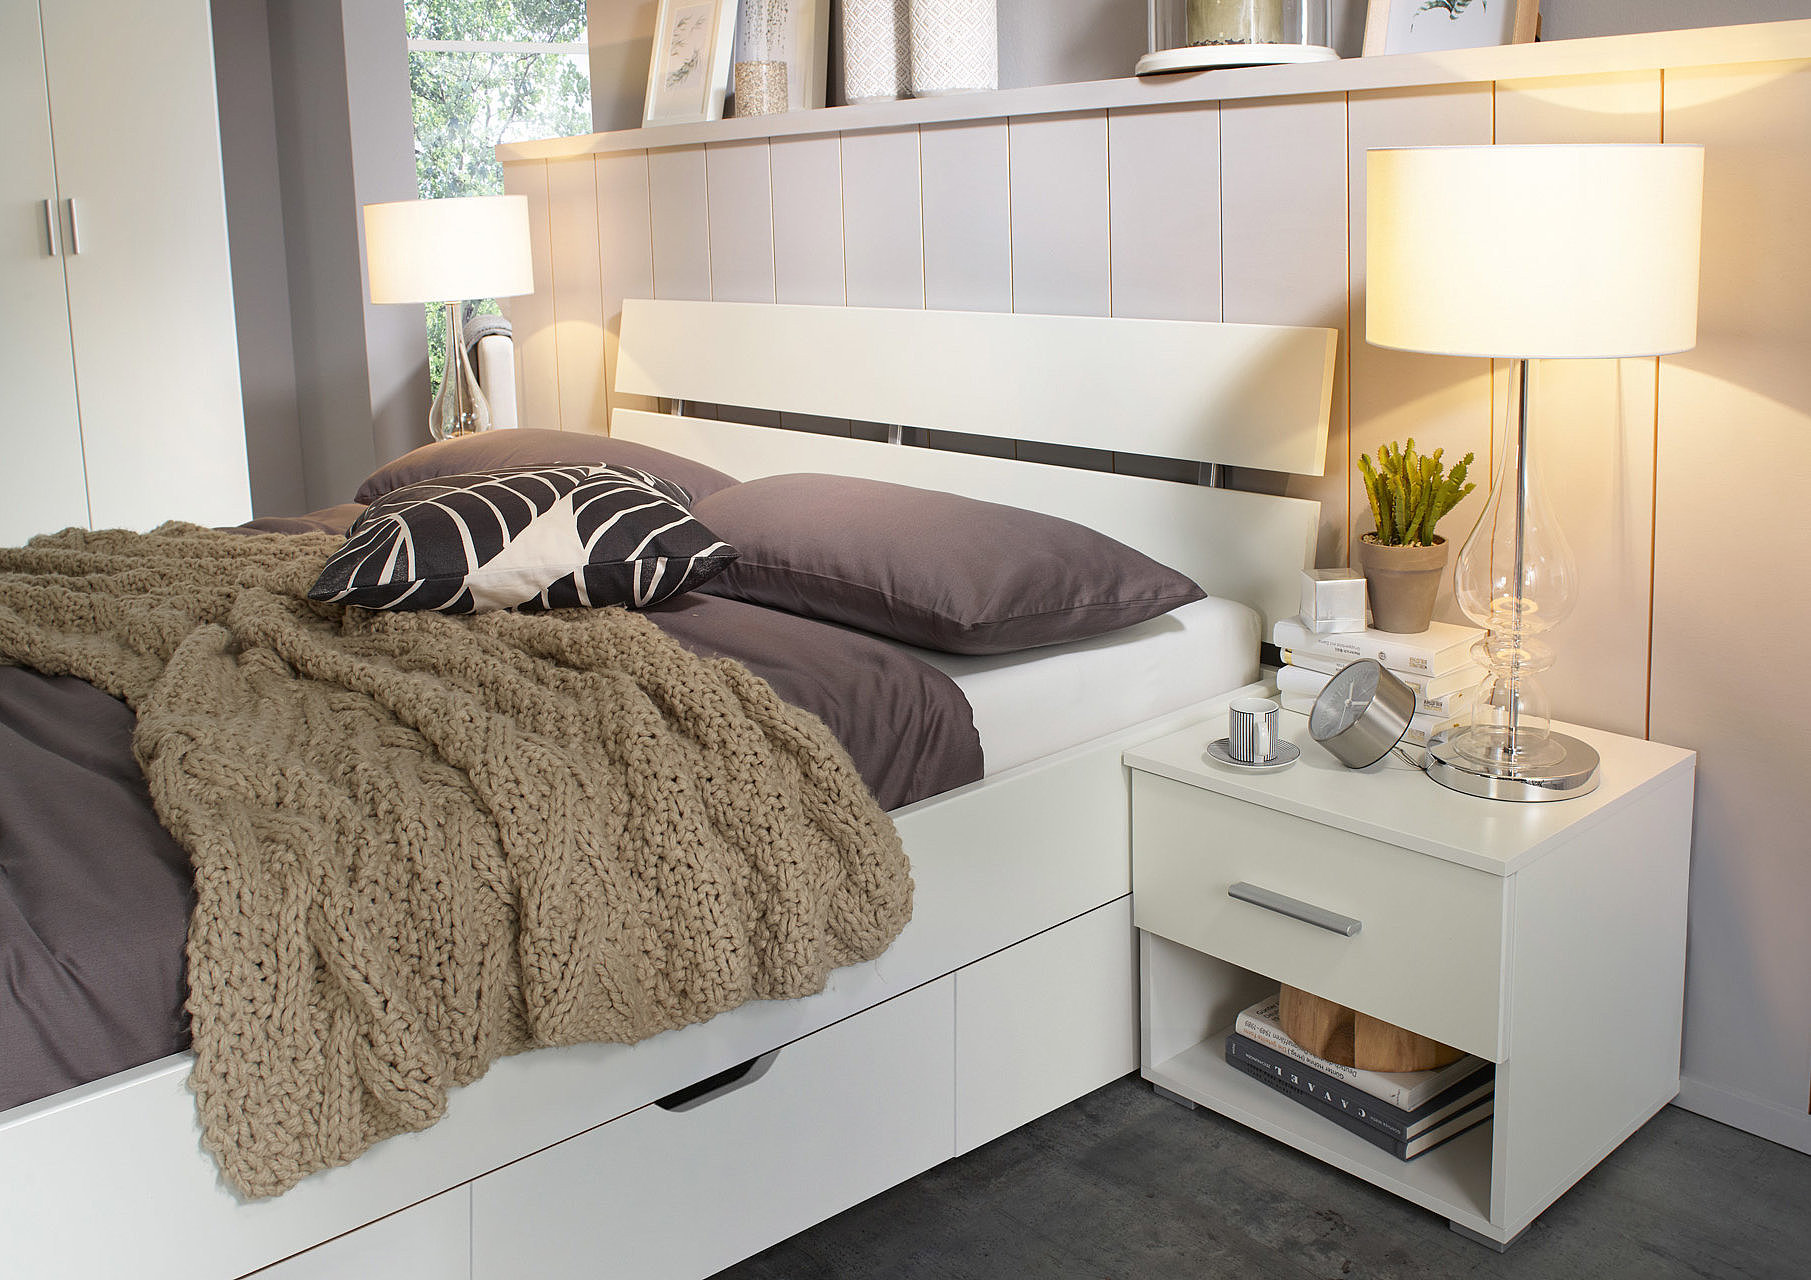 Bed with storage space - nightstand - white